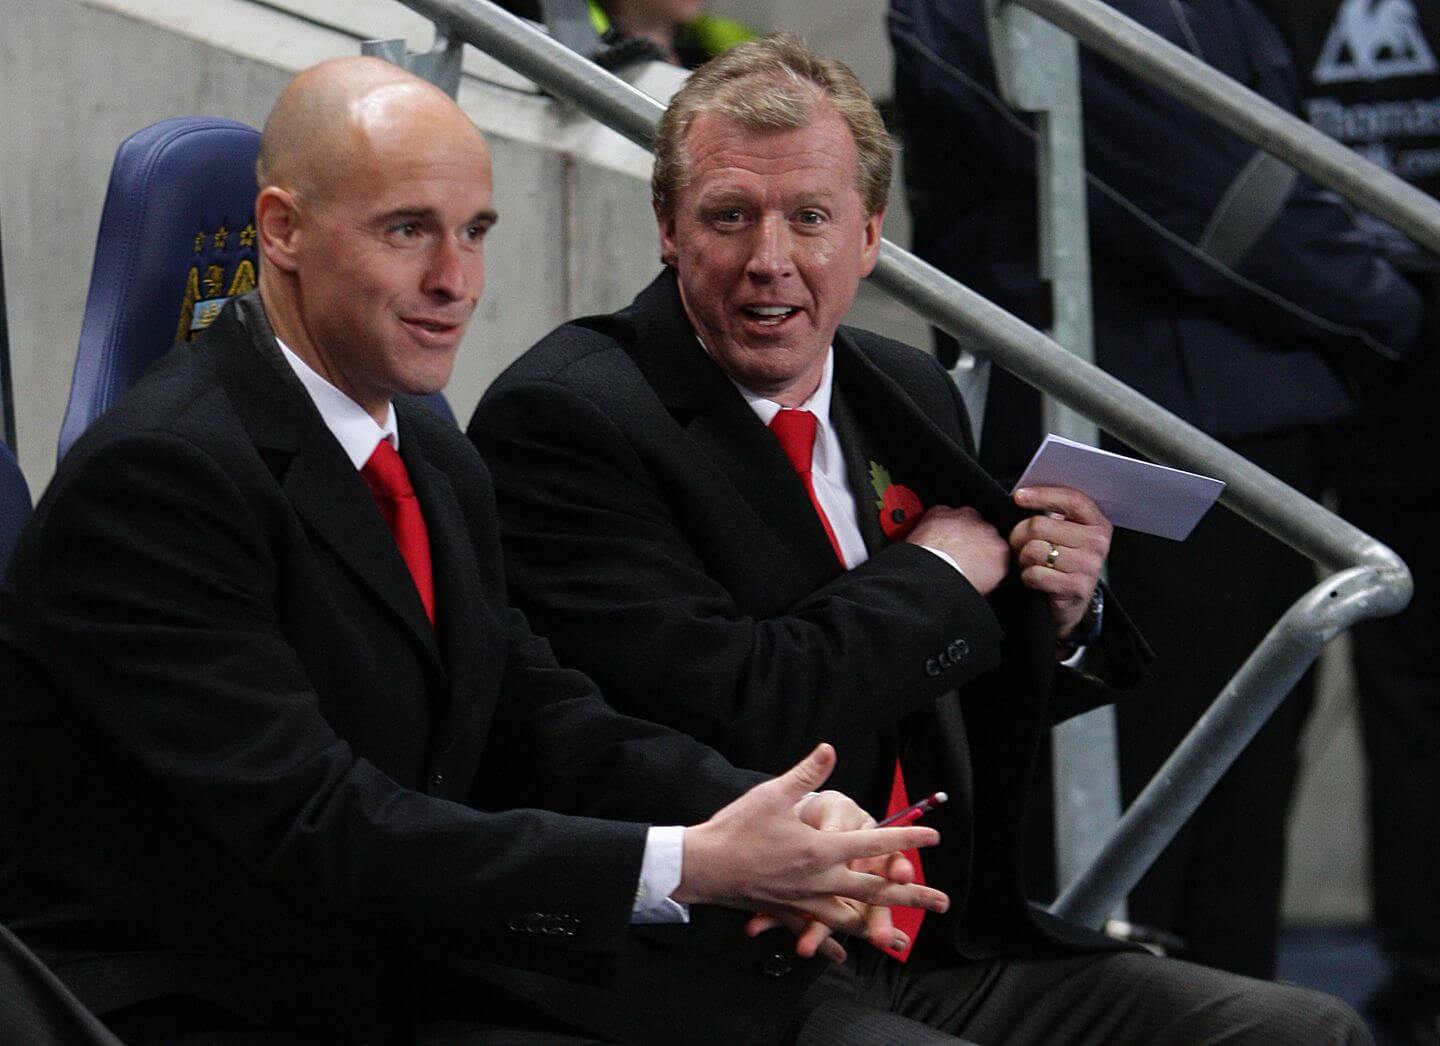 McClaren joins Manchester United planning meeting after receiving invite from Ten Hag